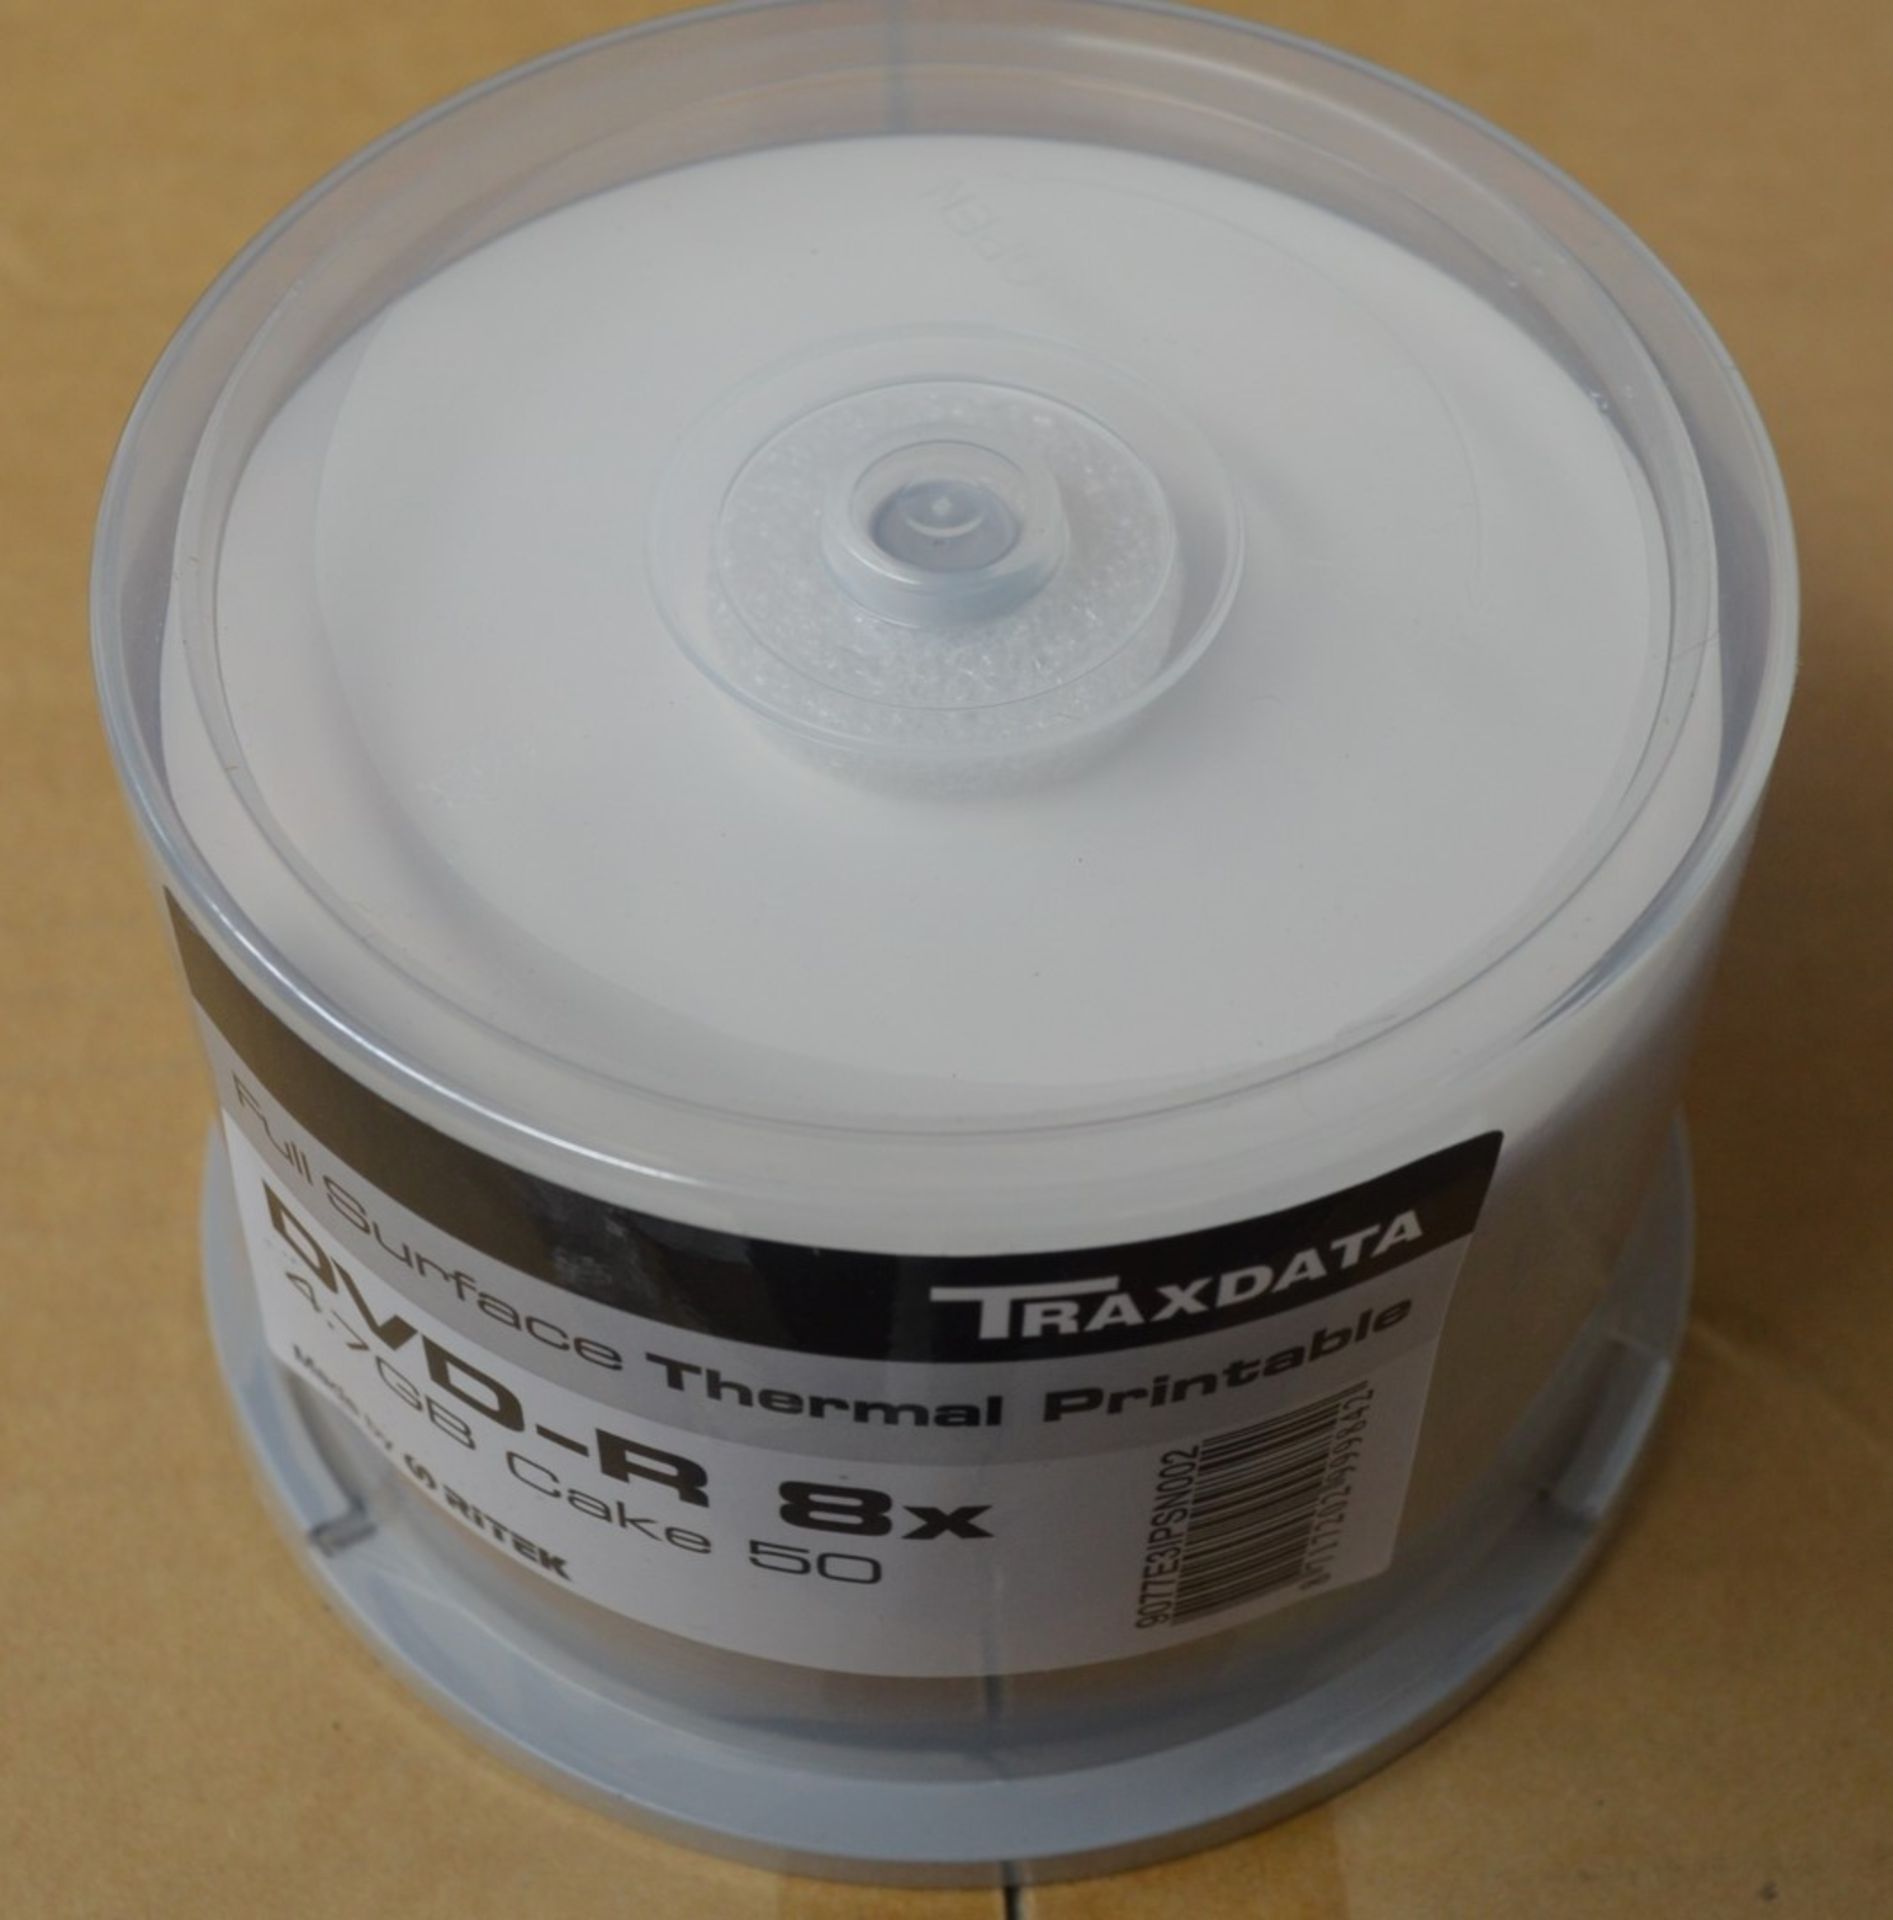 150 x Traxdata Full Surfae Thermal Printable DVDR 8X Discs - Includes 3 x 4.7gb Cake of 50 Discs - - Image 3 of 4